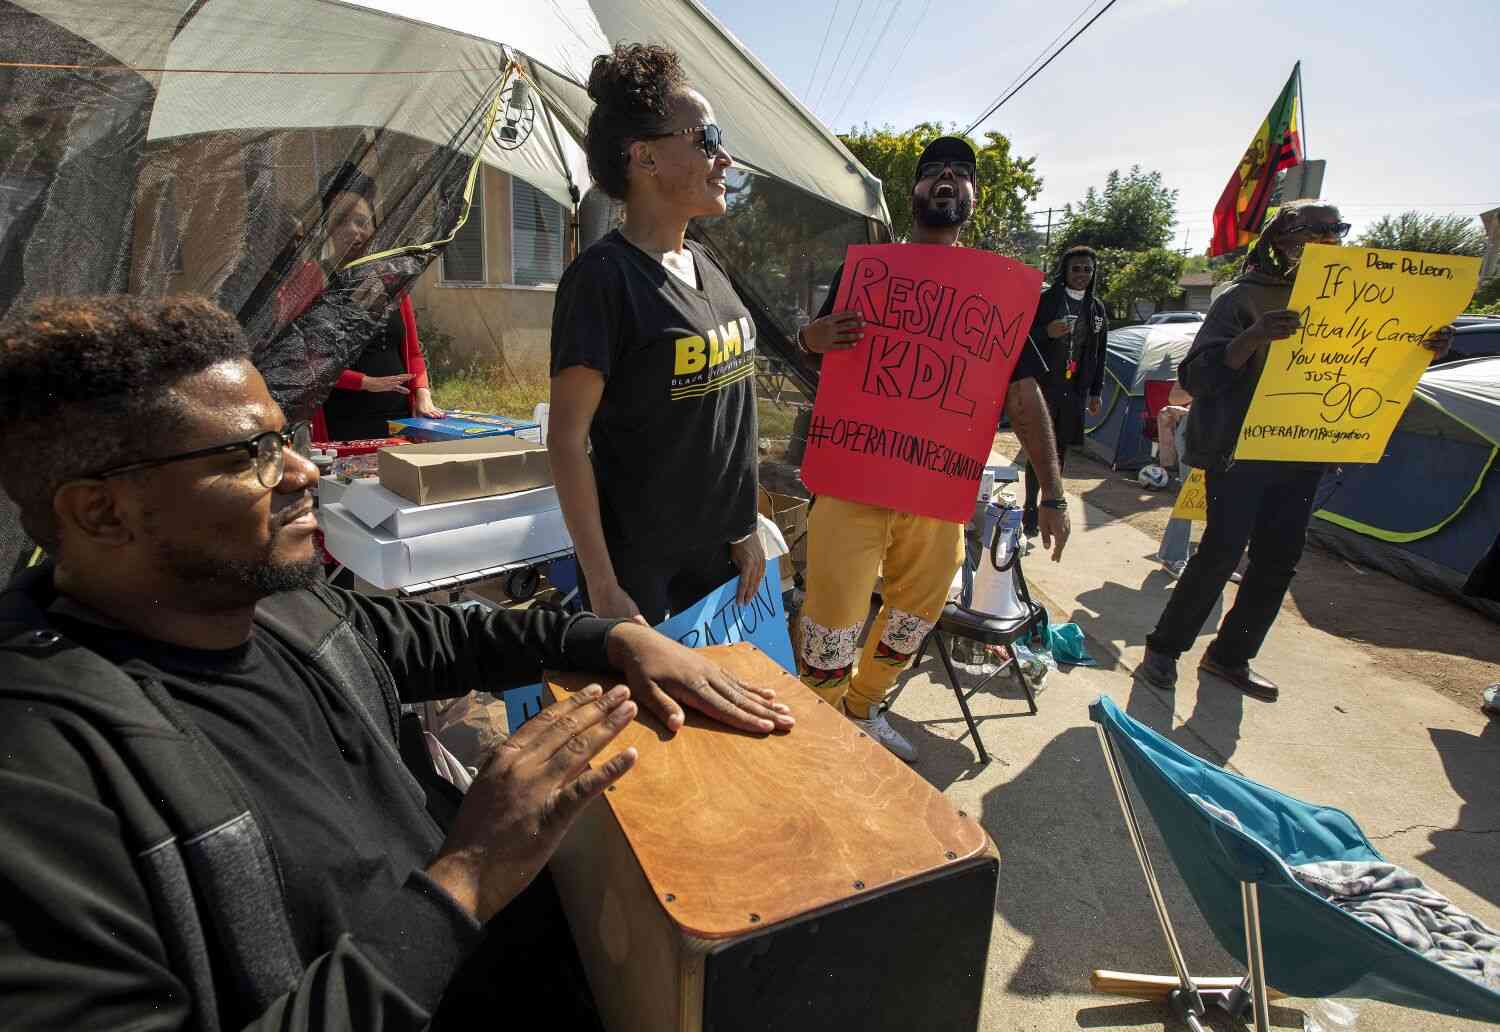 Occupy Cleveland organizers say protesters are welcome to do so